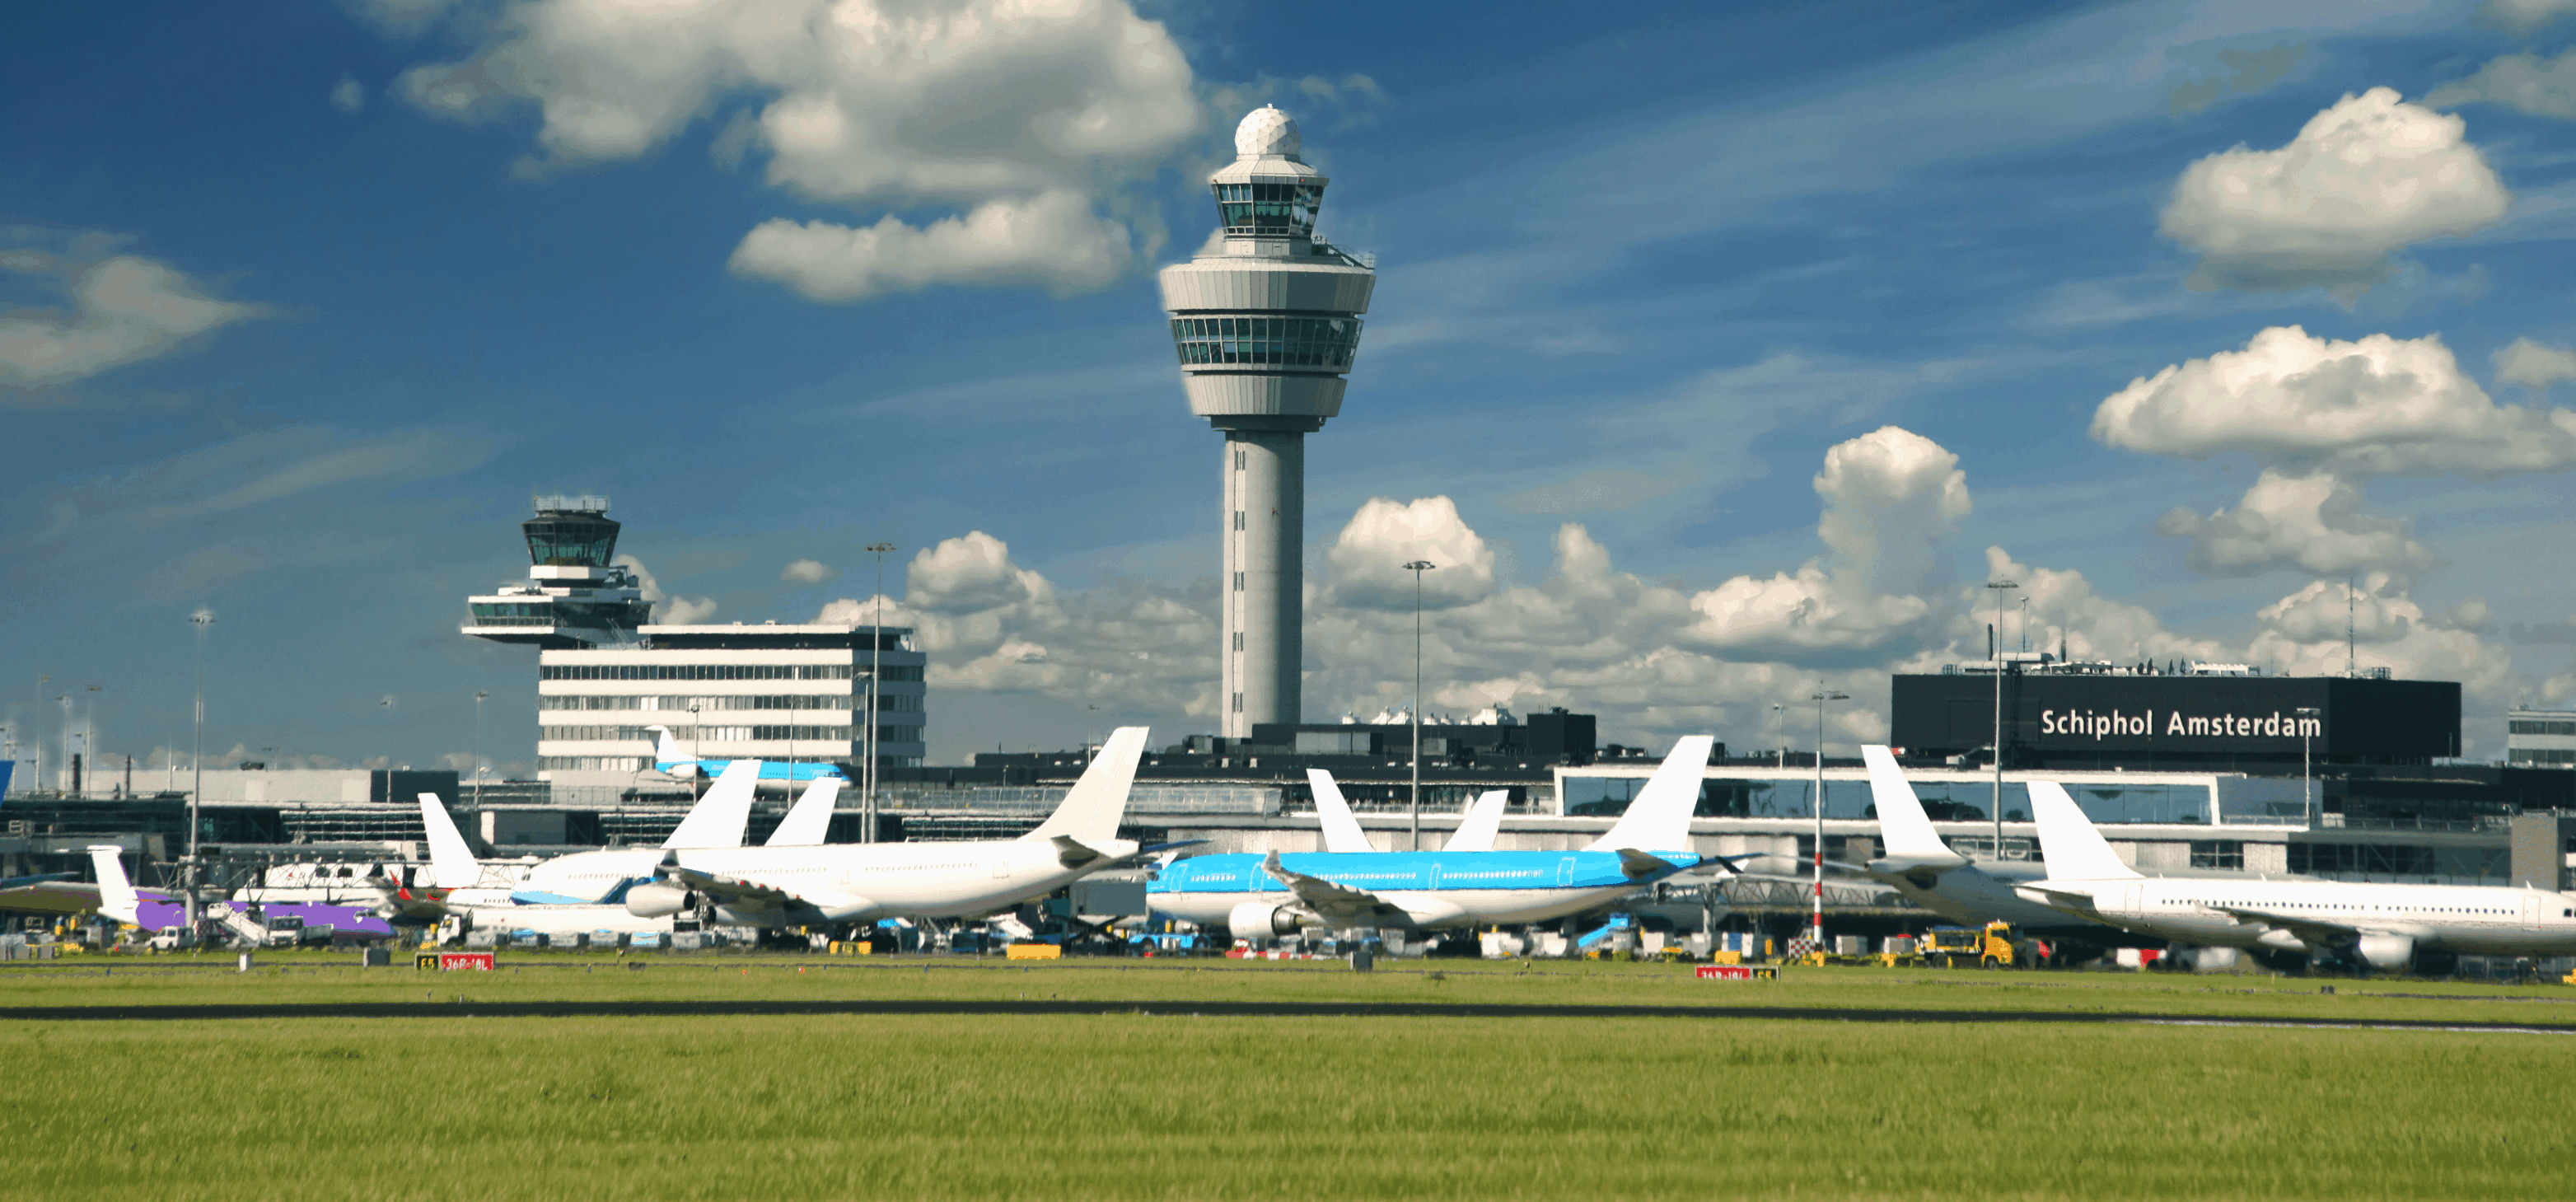 Flying High Schiphol Airports New Mobile Workforce App Mendix